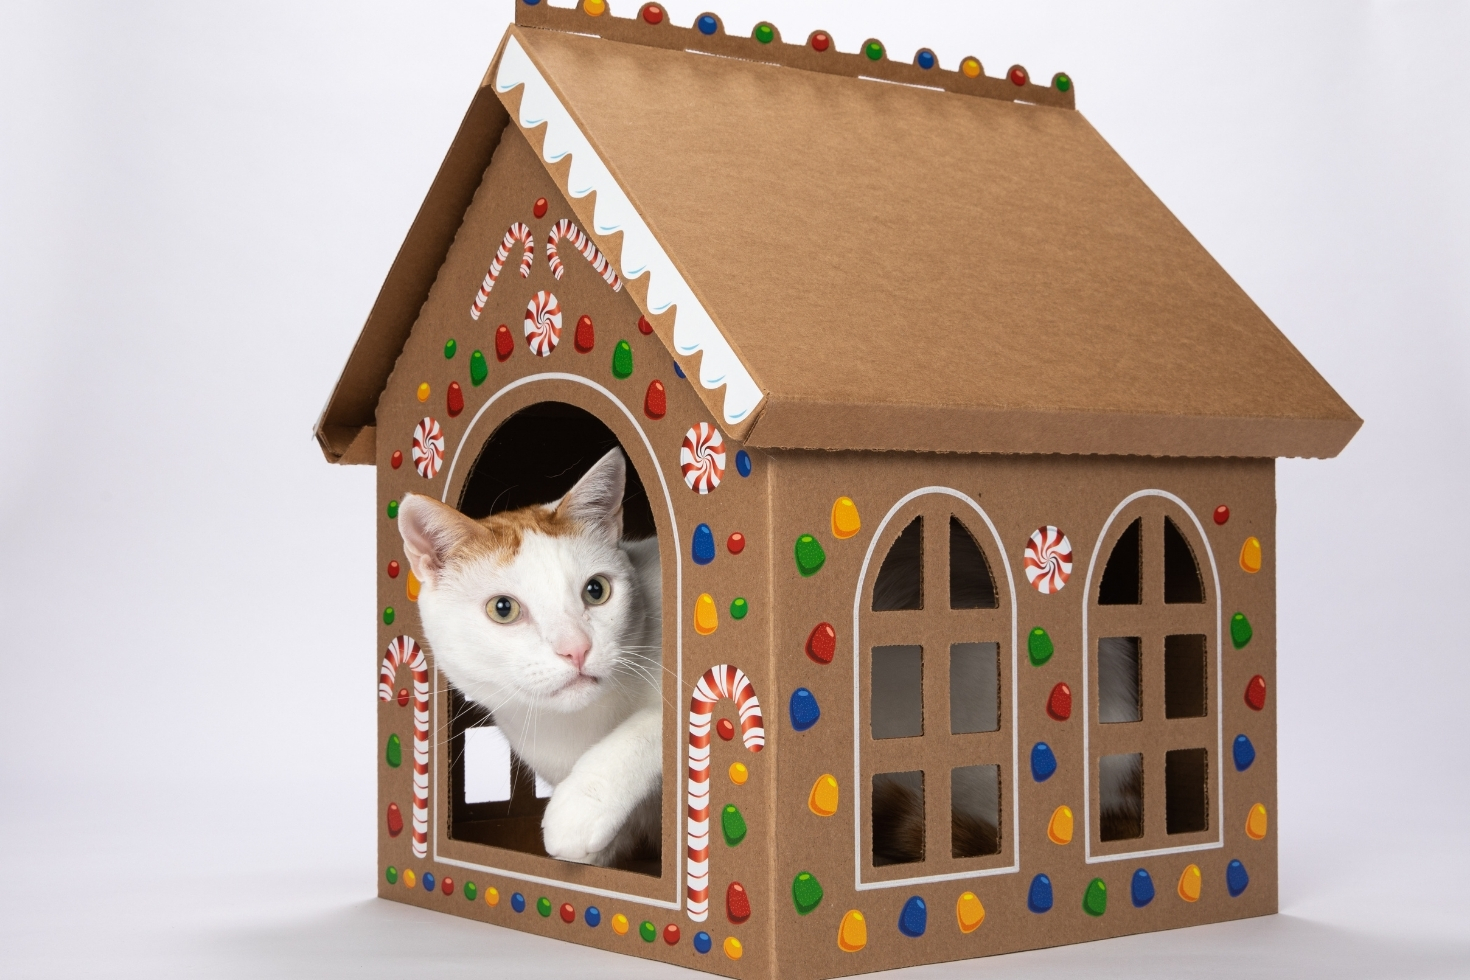 White cat sitting inside a cardboard box shaped as a house